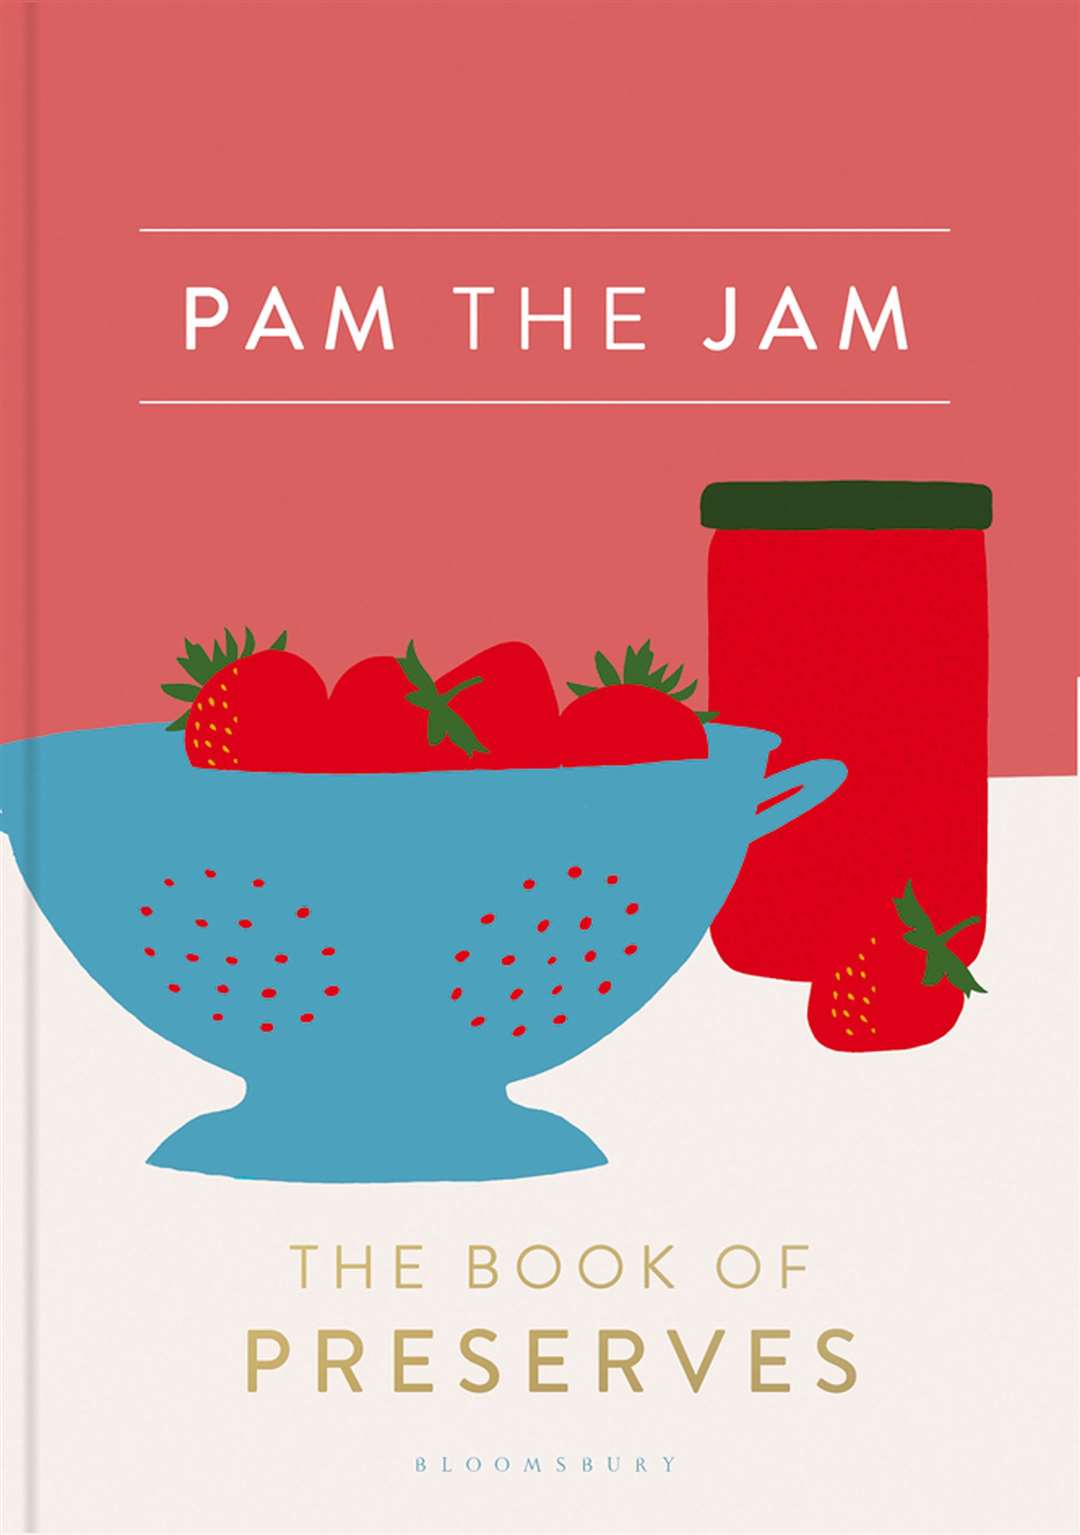 Pam The Jam: The Book of Preserves by Pam Corbin, is published by Bloomsbury, priced £20. Available now.